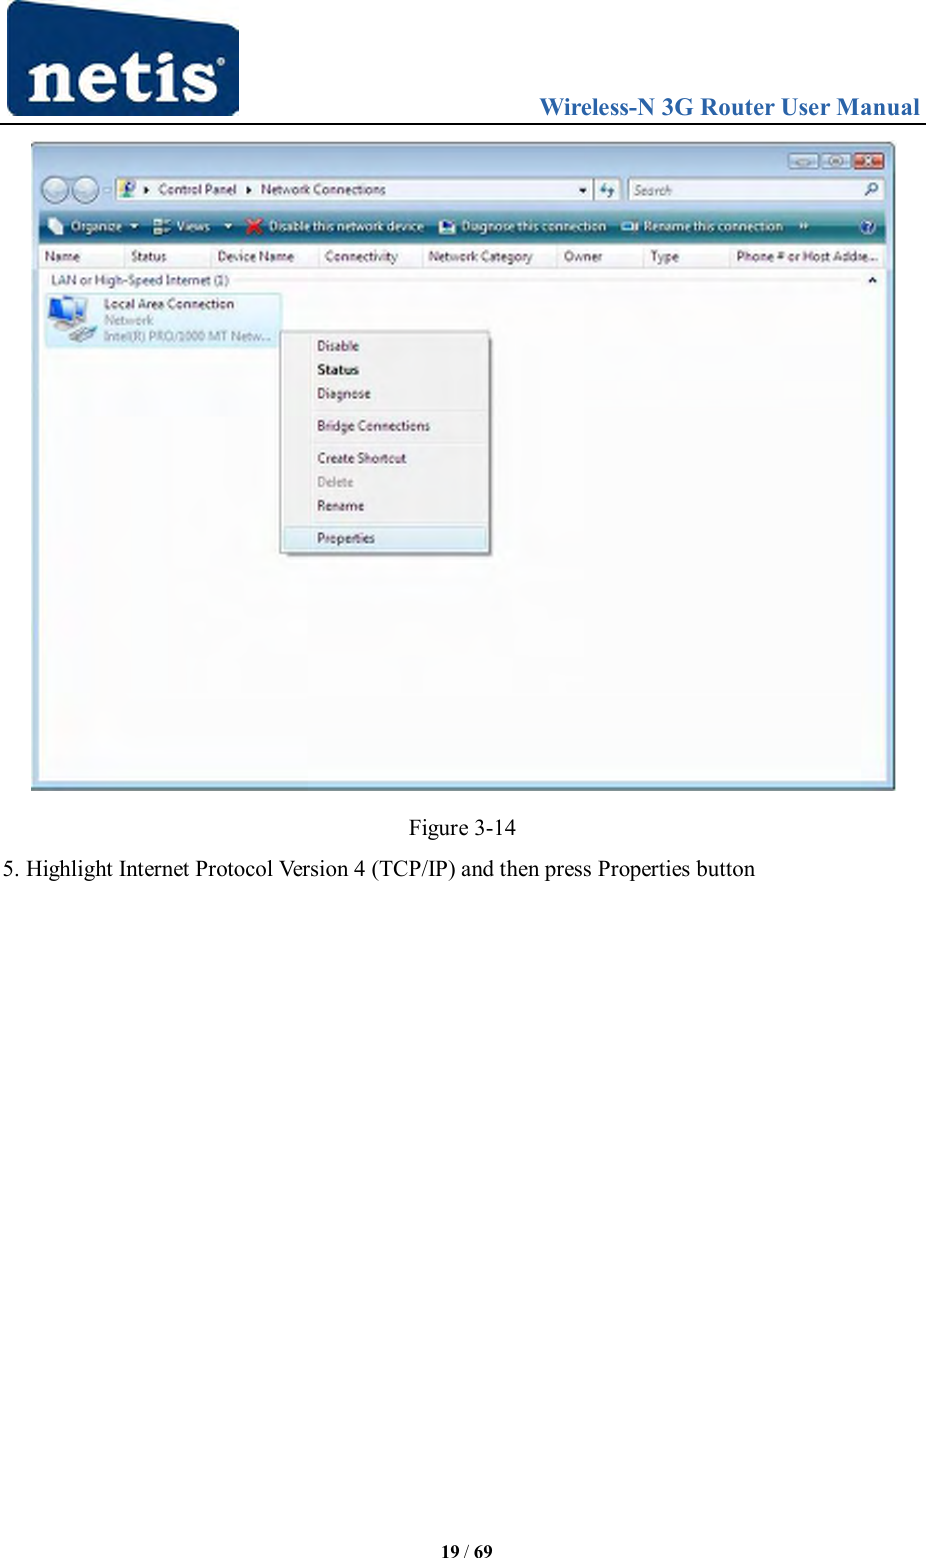                                 Wireless-N 3G Router User Manual  19 / 69  Figure 3-14 5. Highlight Internet Protocol Version 4 (TCP/IP) and then press Properties button 